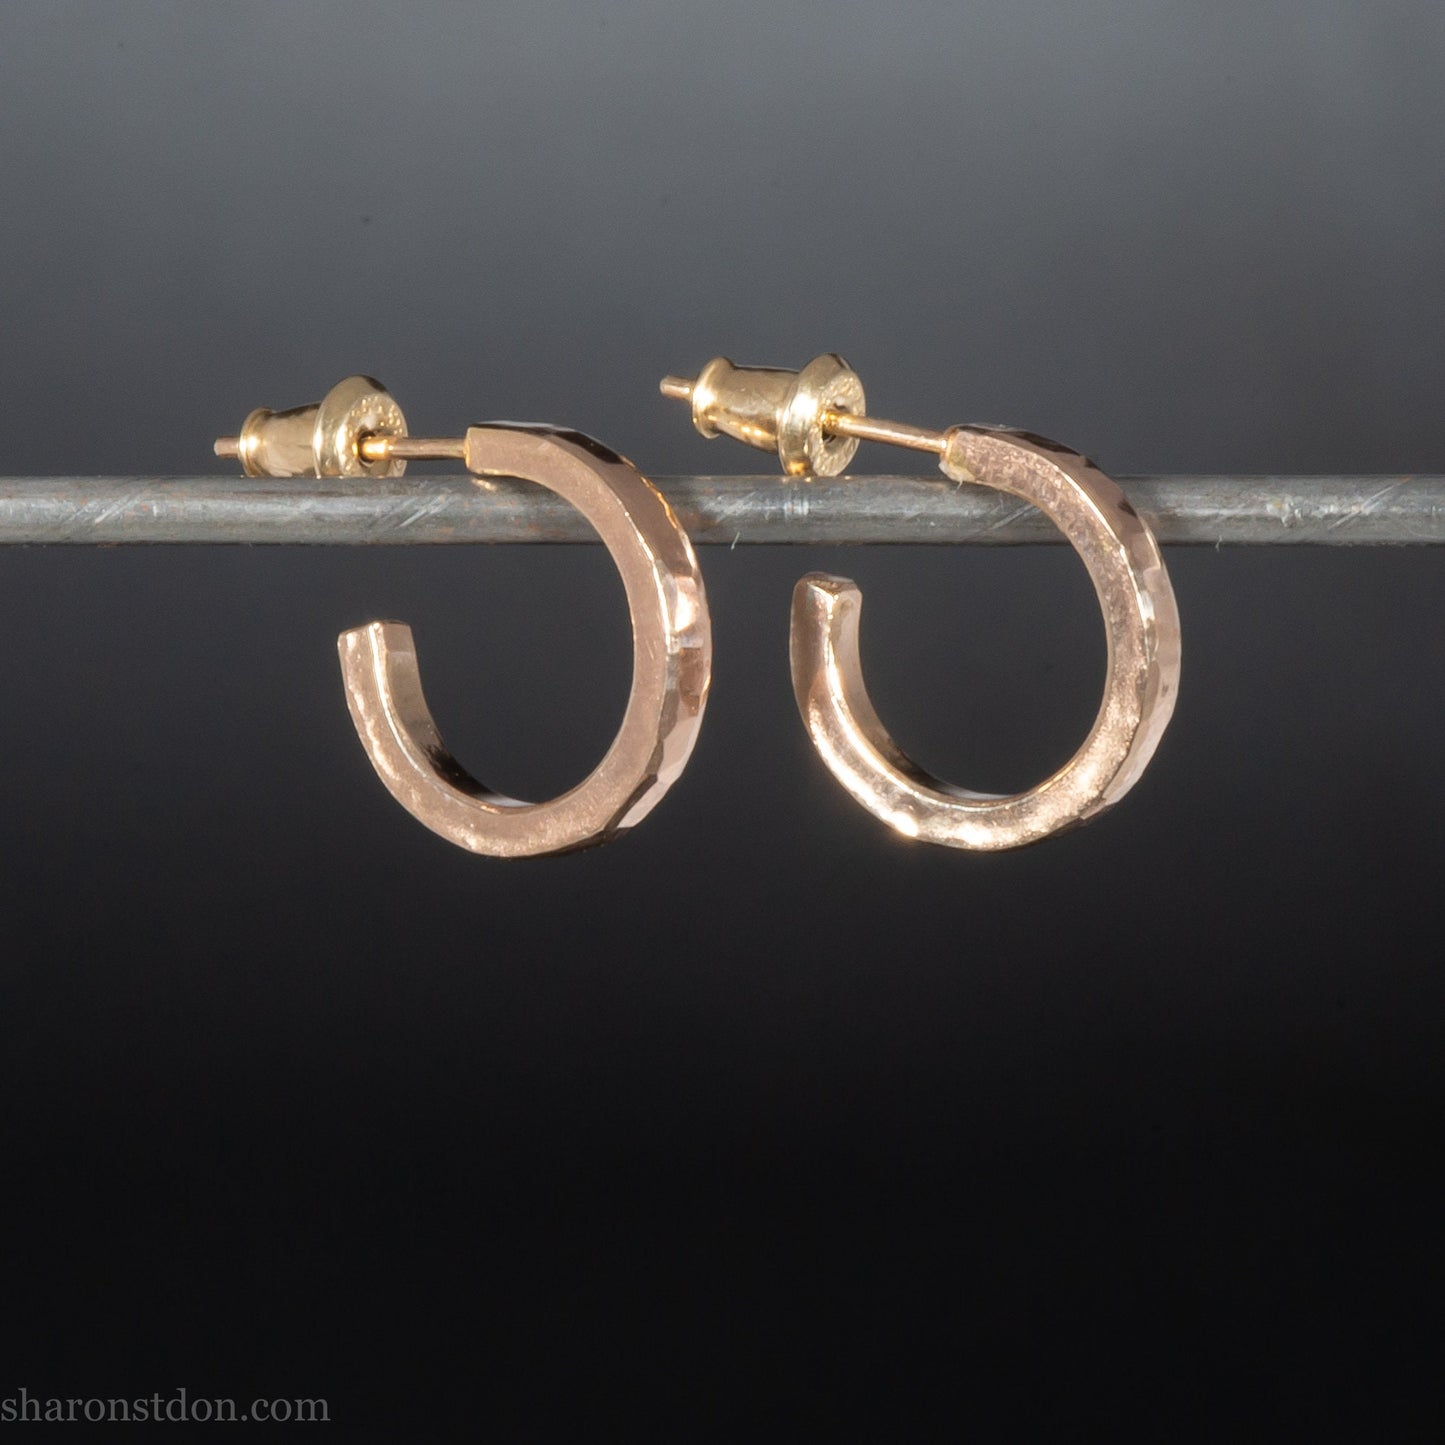 14mm x 2mm small 18k gold hoop earrings for men | Handmade solid gold hoop earrings | Eco Conscious gift made in the USA